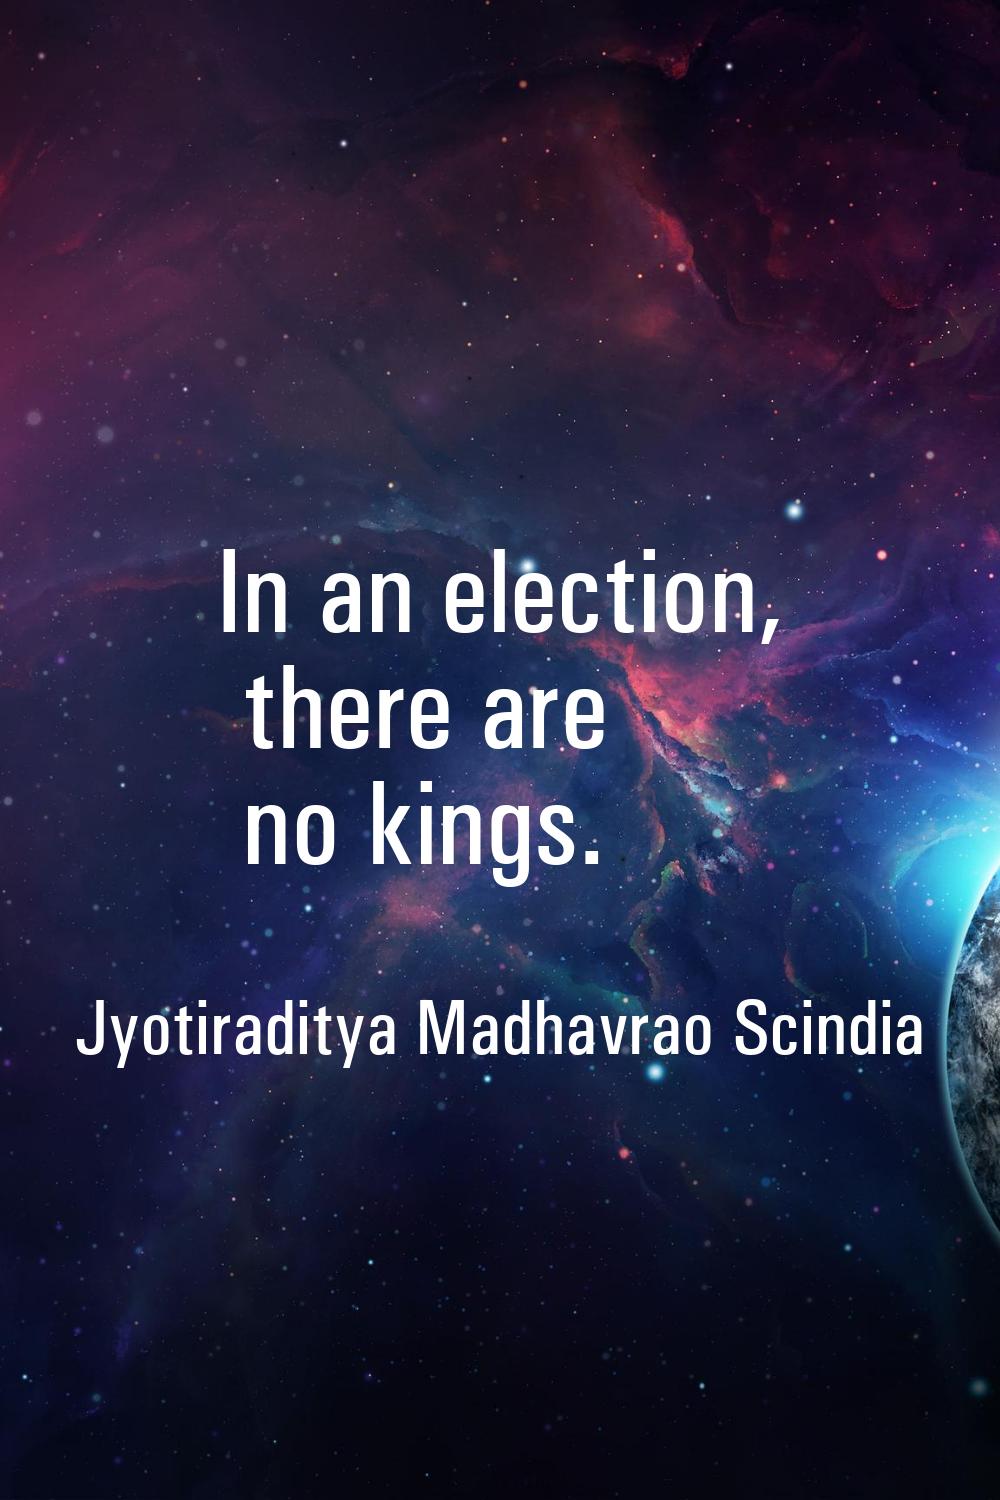 In an election, there are no kings.